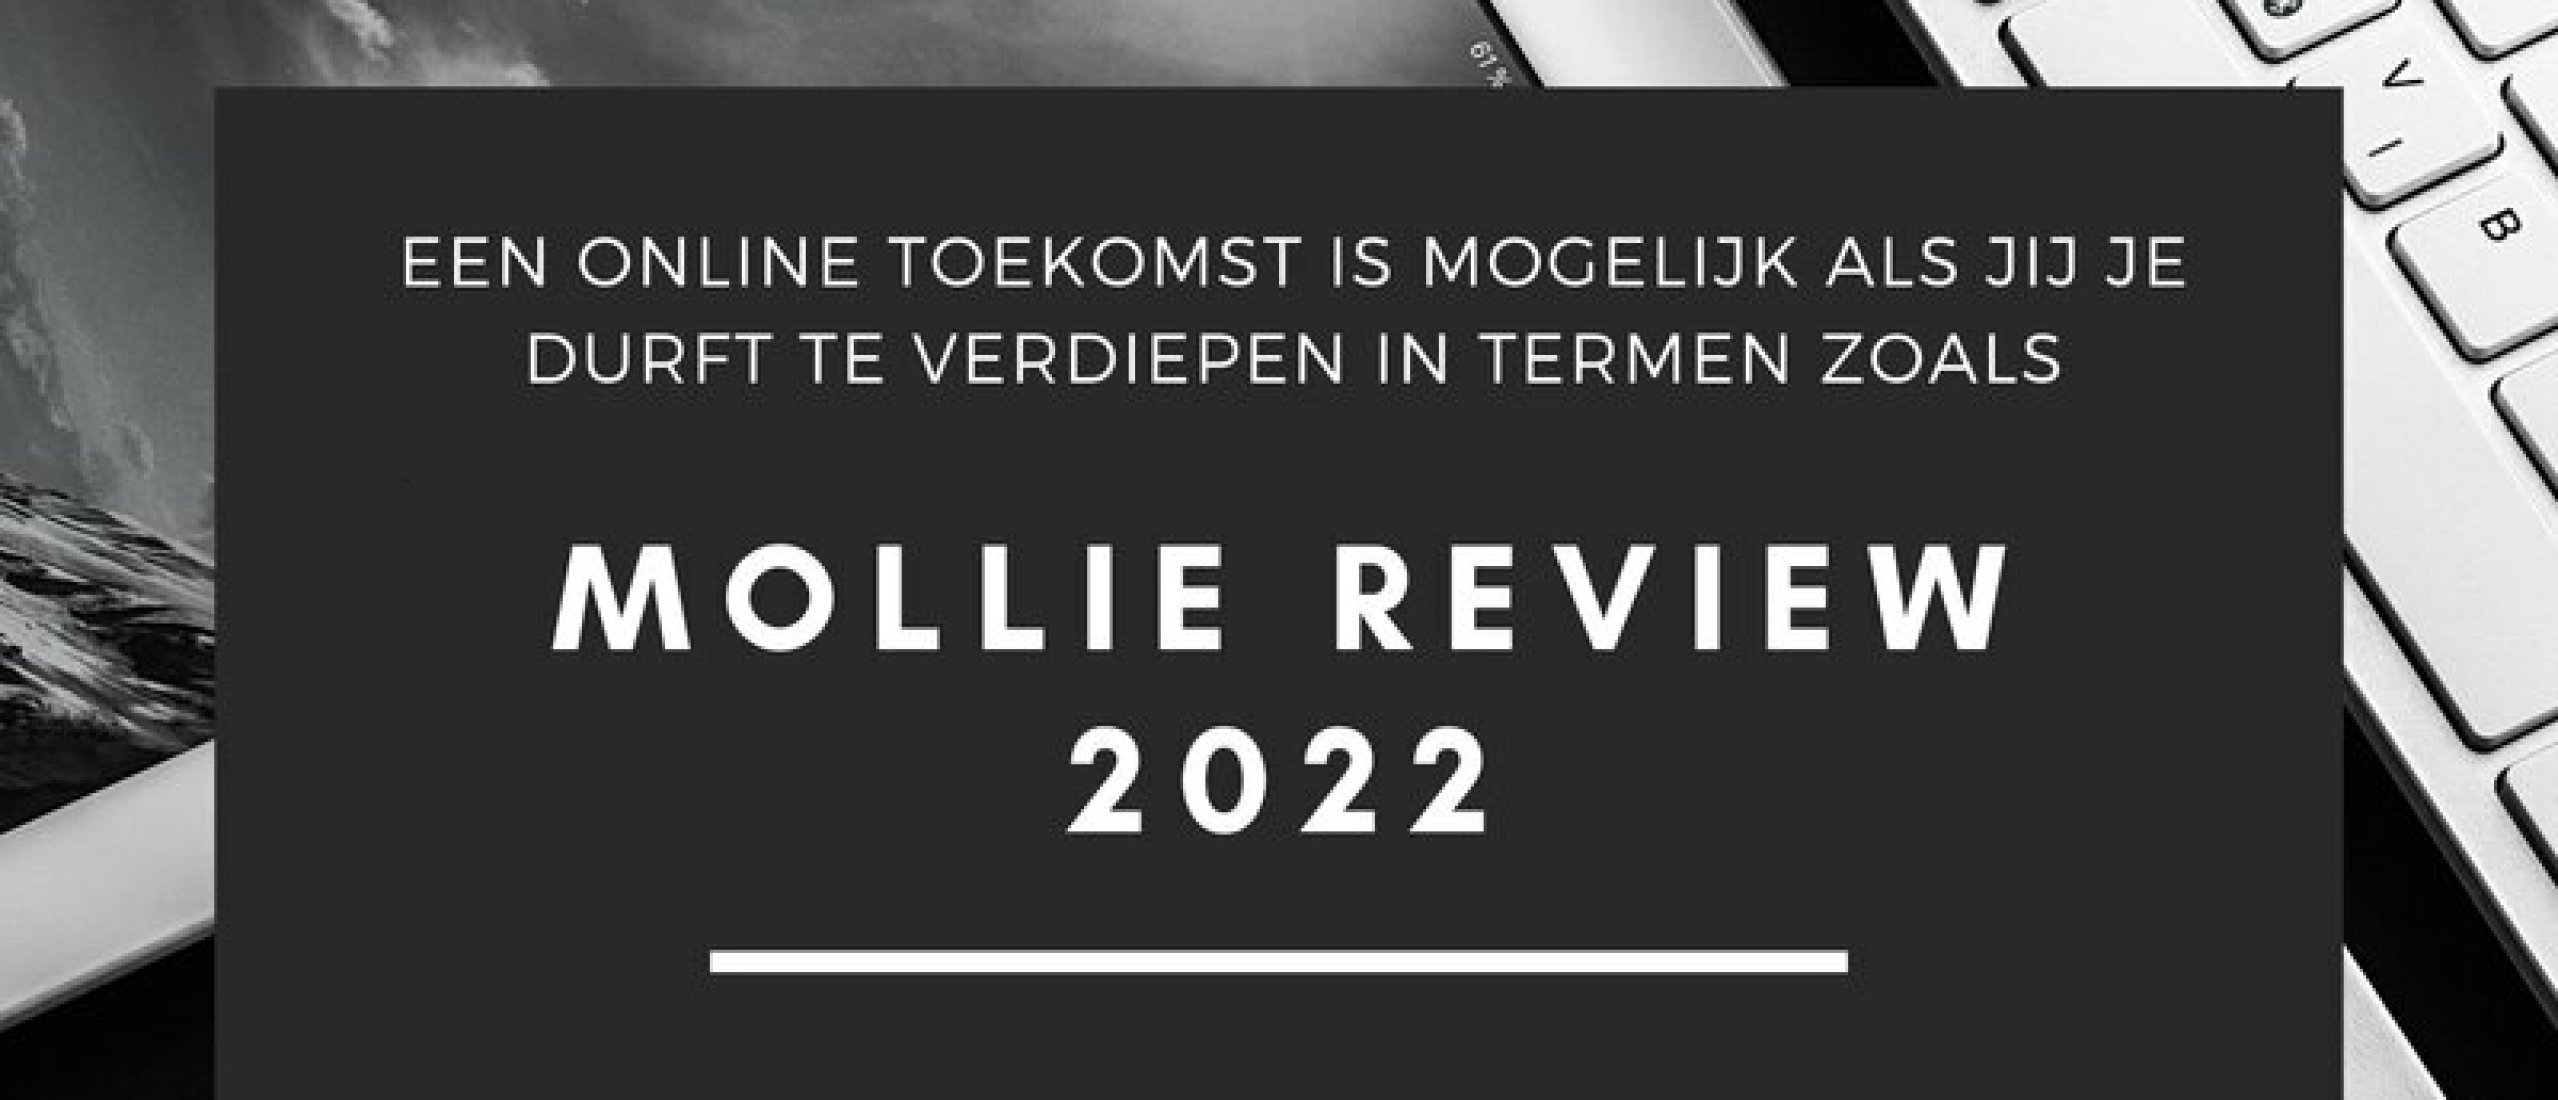 Mollie Review